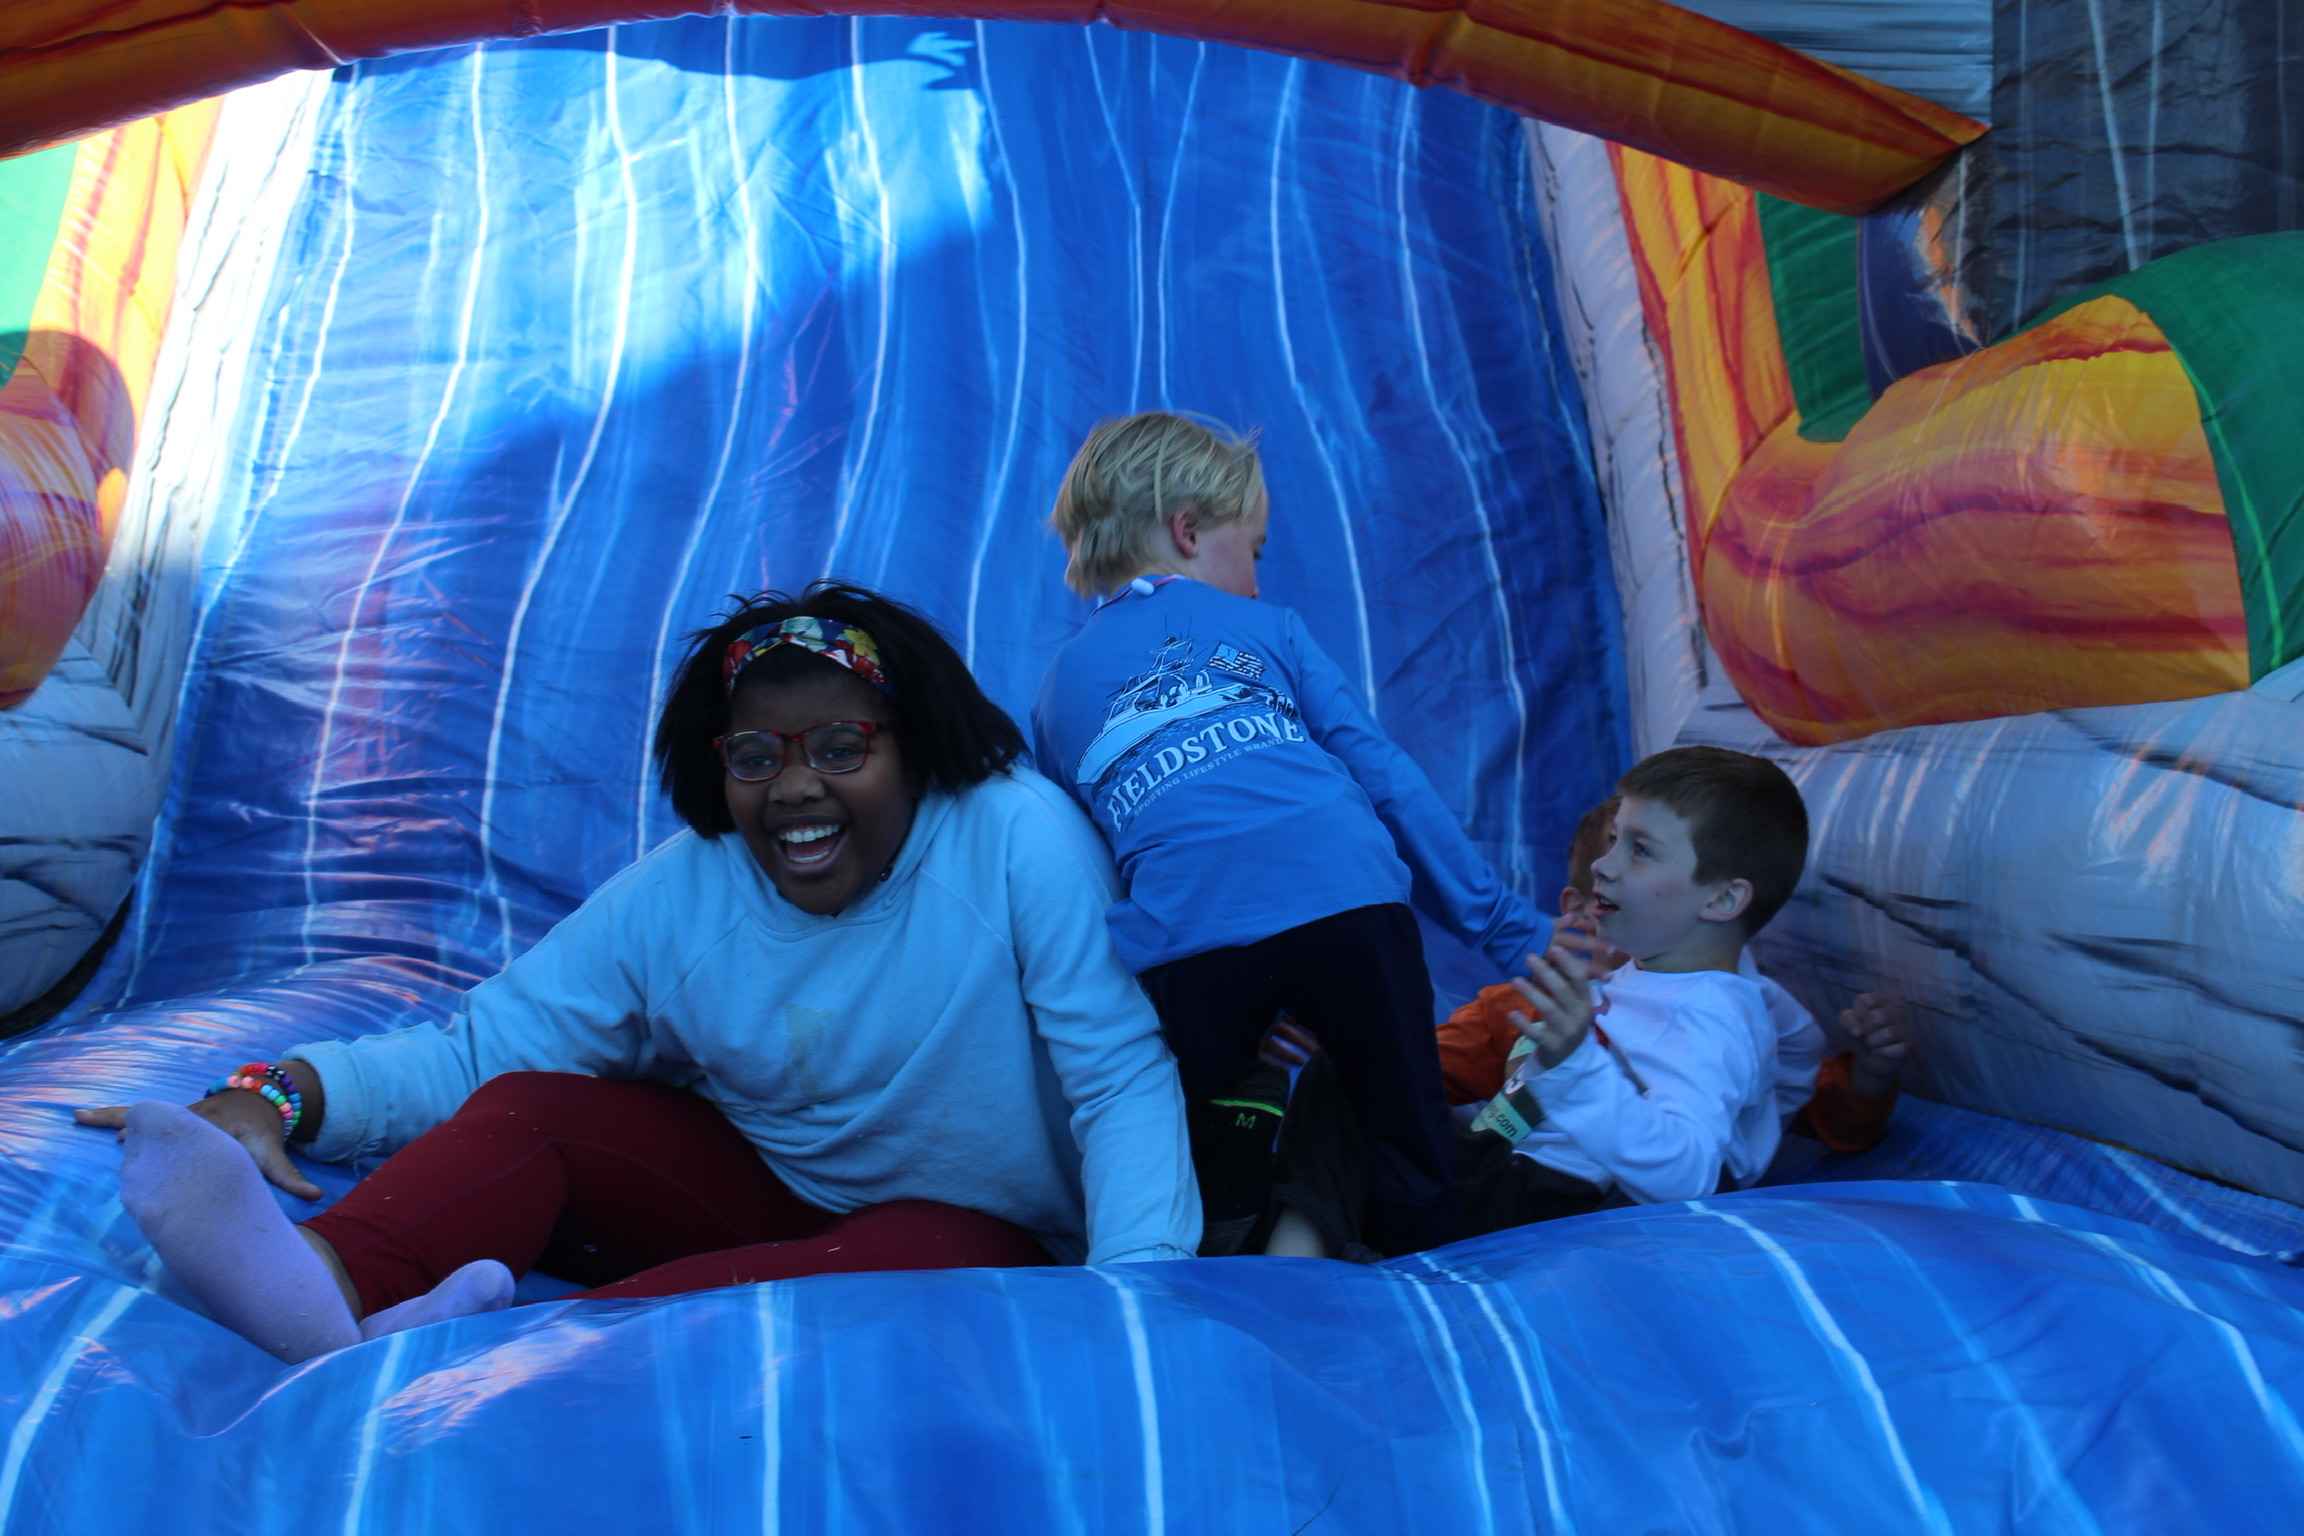 Three children enjoying playing in the Bounce House.